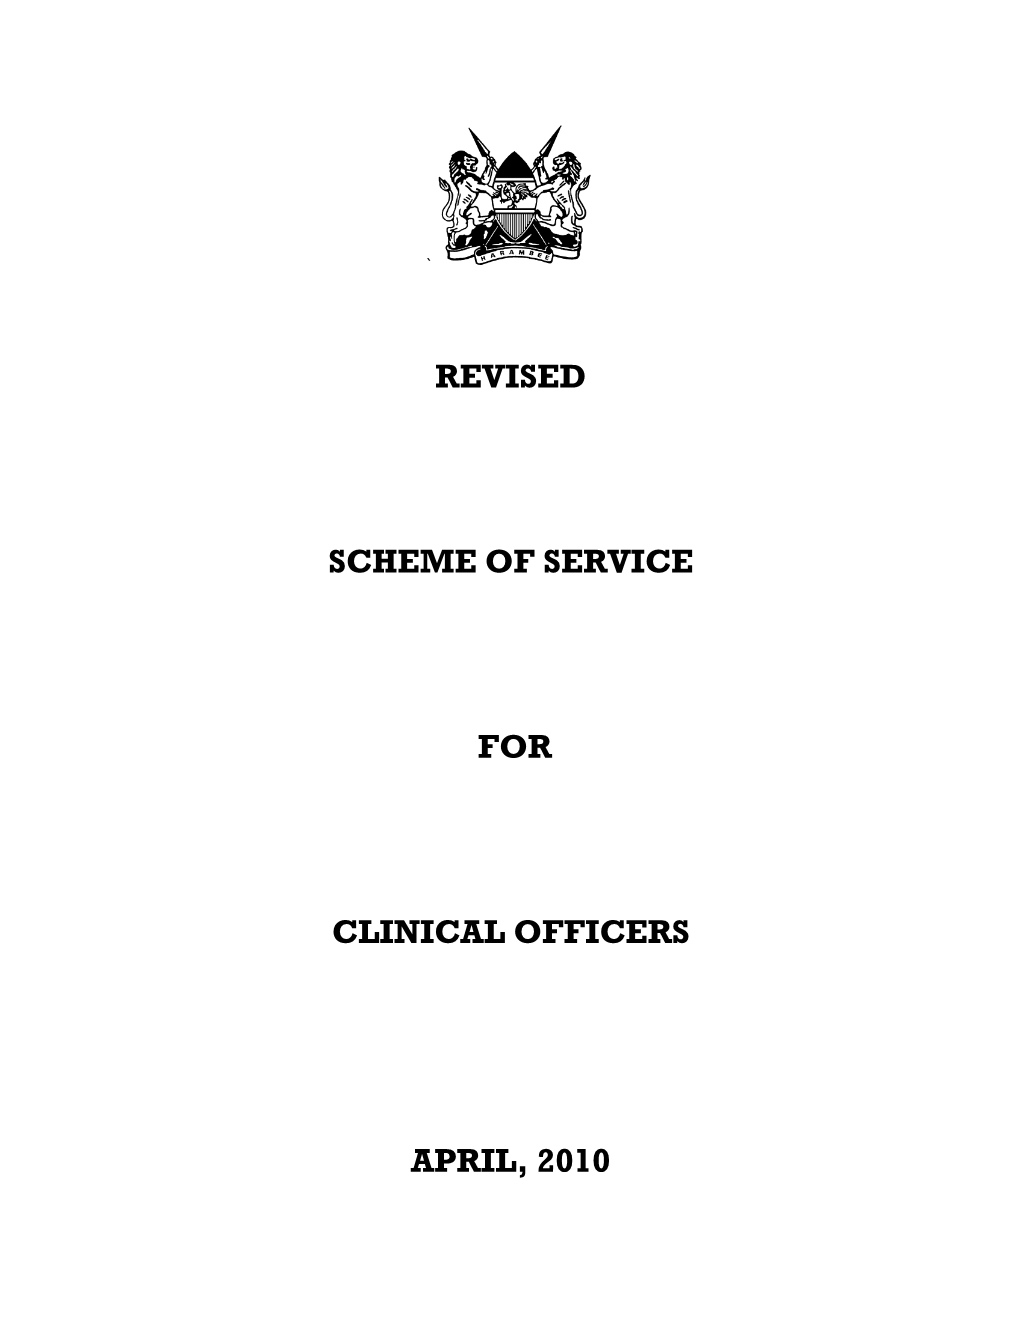 Revised Scheme of Service for Clinical Officers April